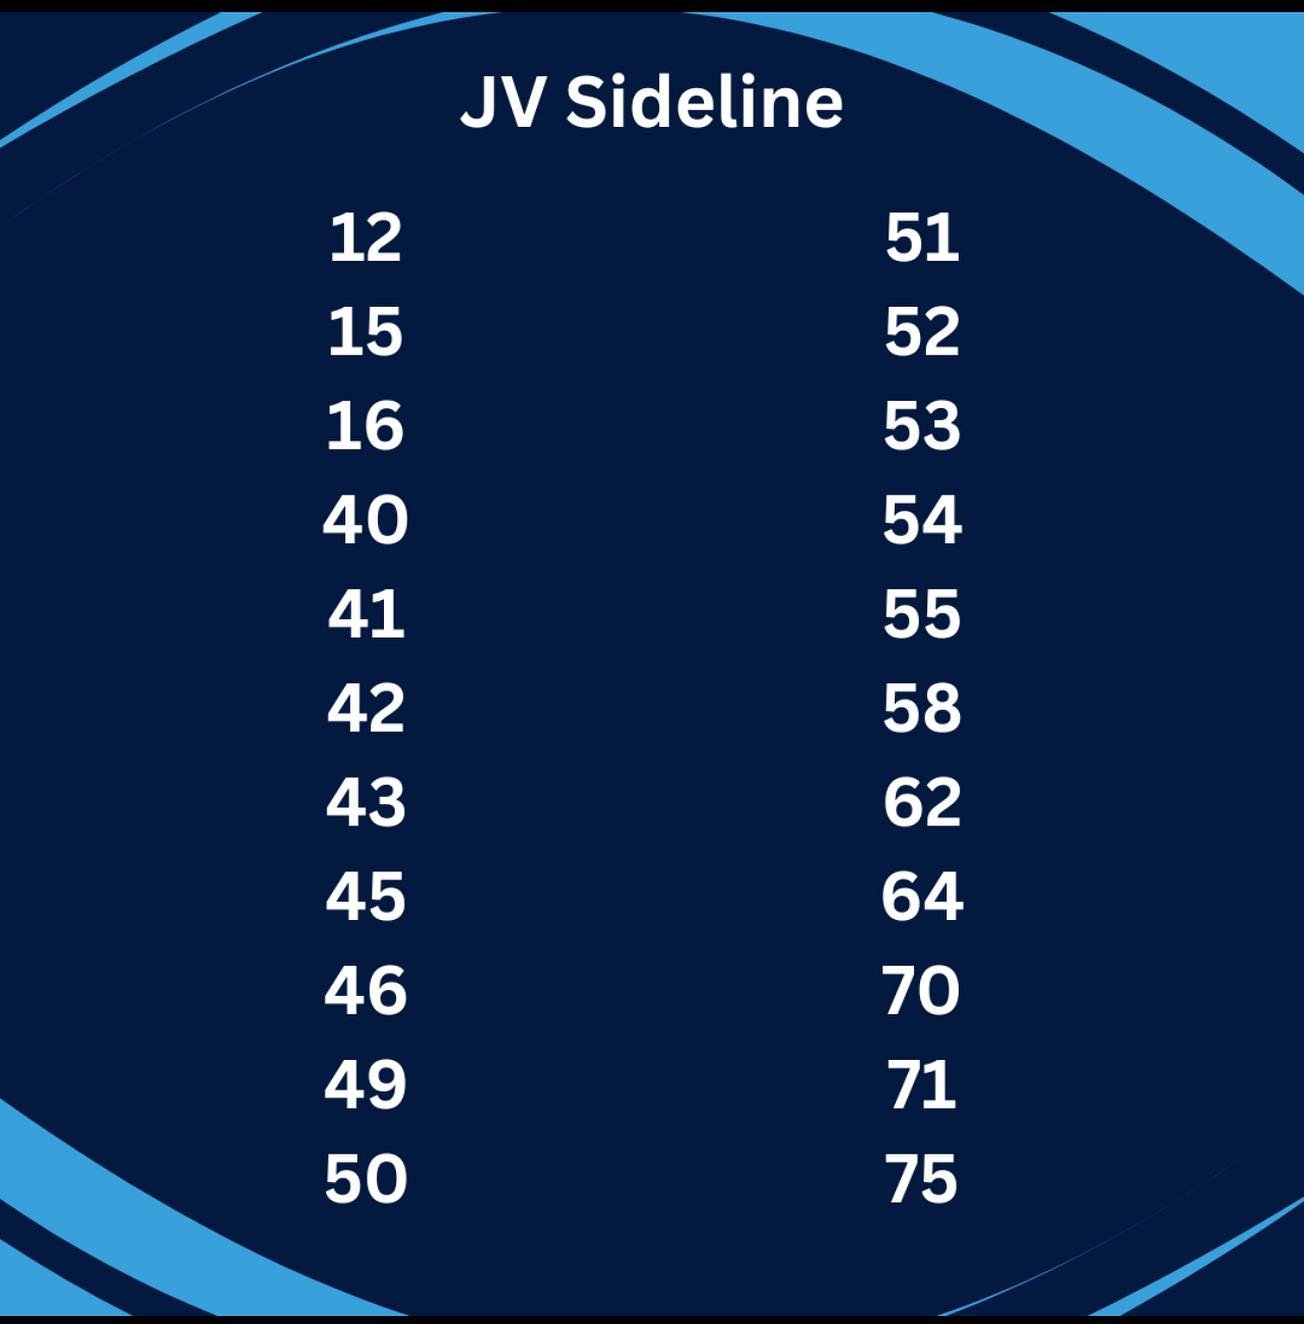 Congratulations to all the athletes that made our JV 24/25
Sideline team. Please see additional info in on our website.